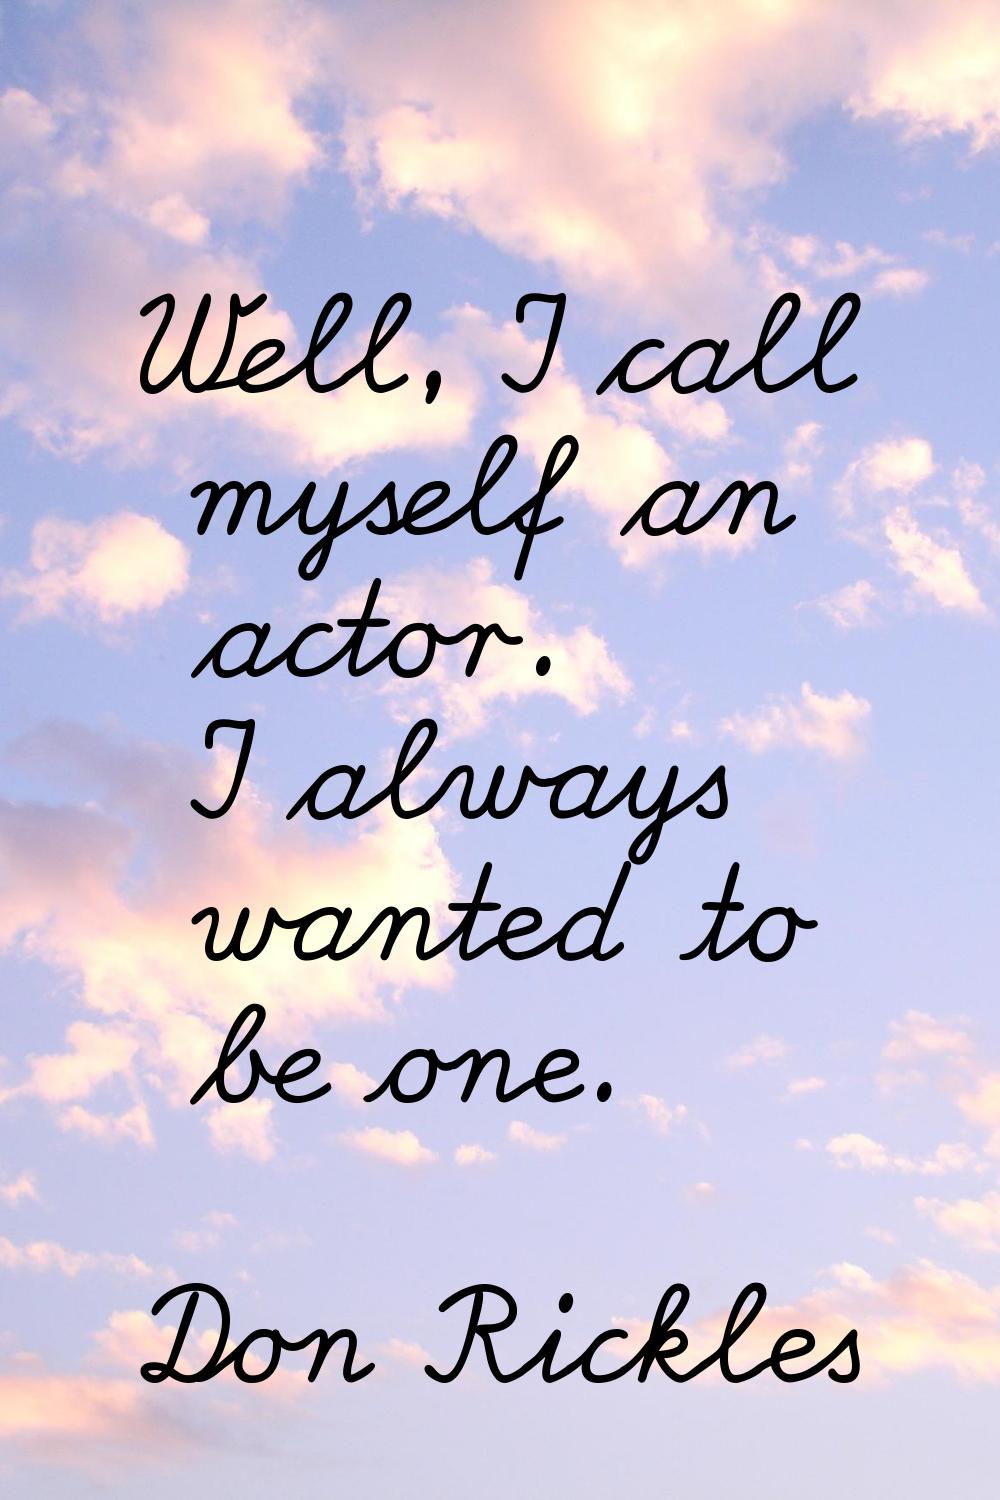 Well, I call myself an actor. I always wanted to be one.